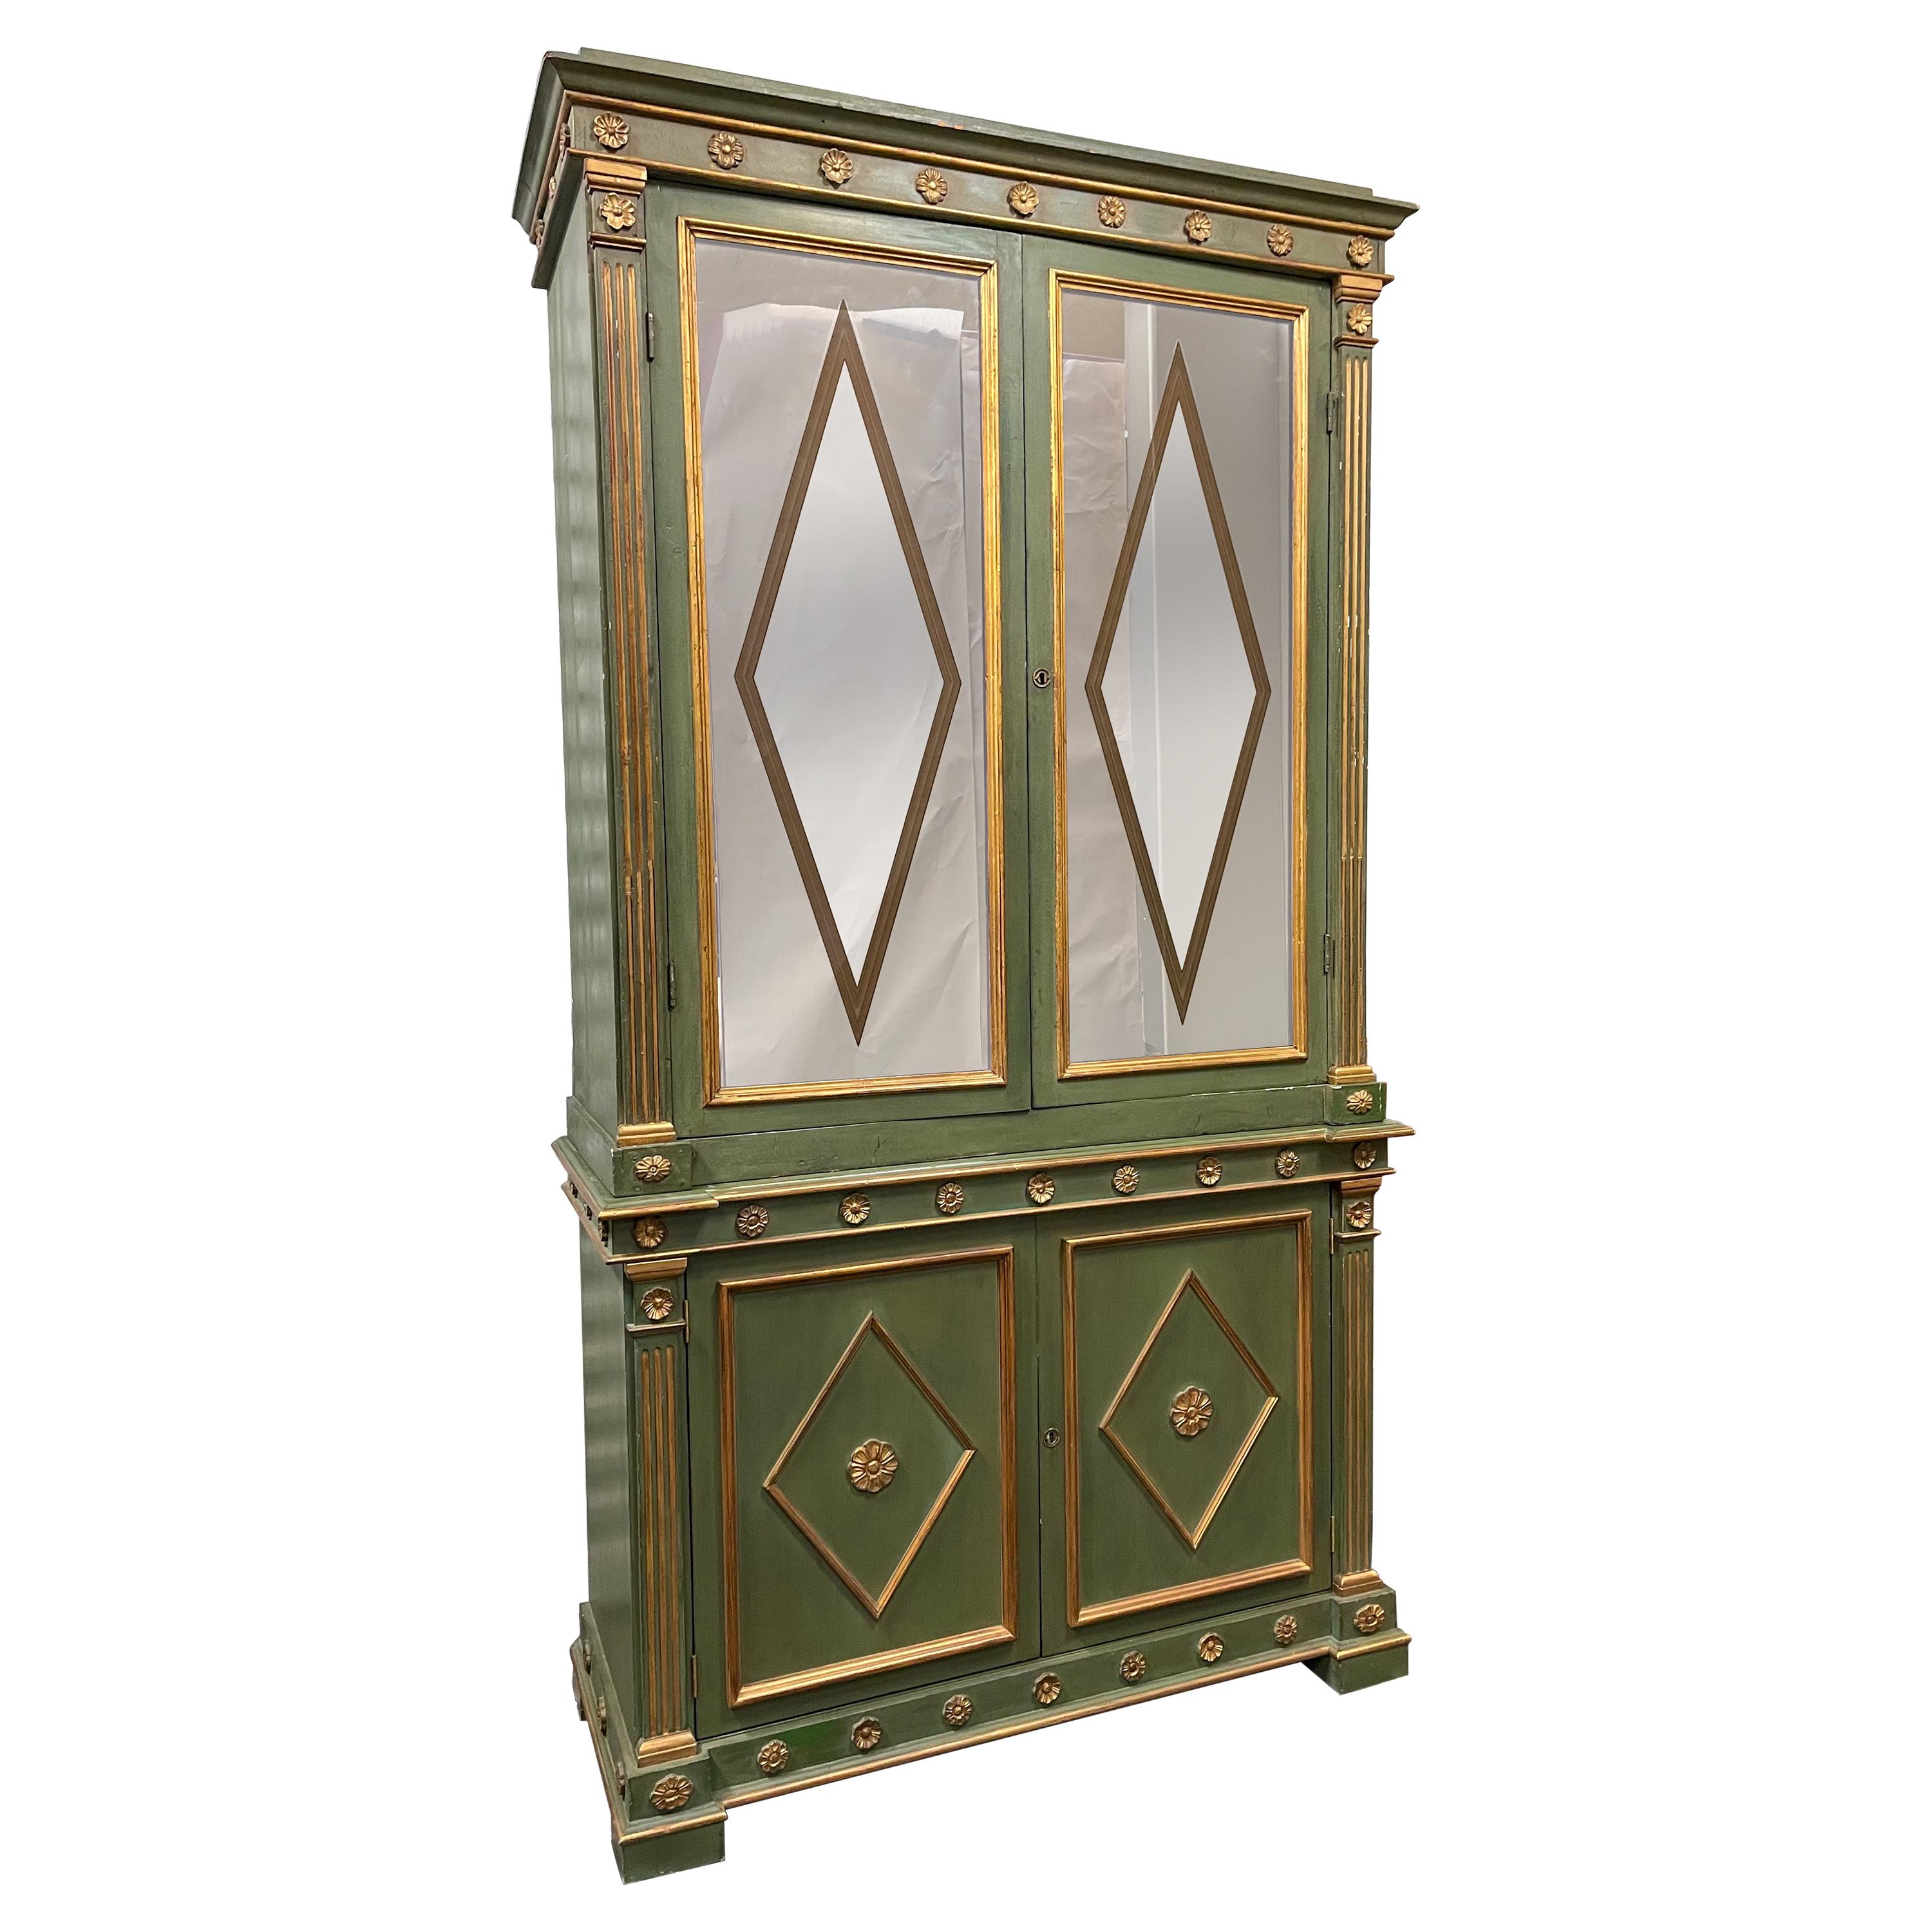 Early 20th-C. Painted Venetian Neo-Classical Style Cabinet or Bar